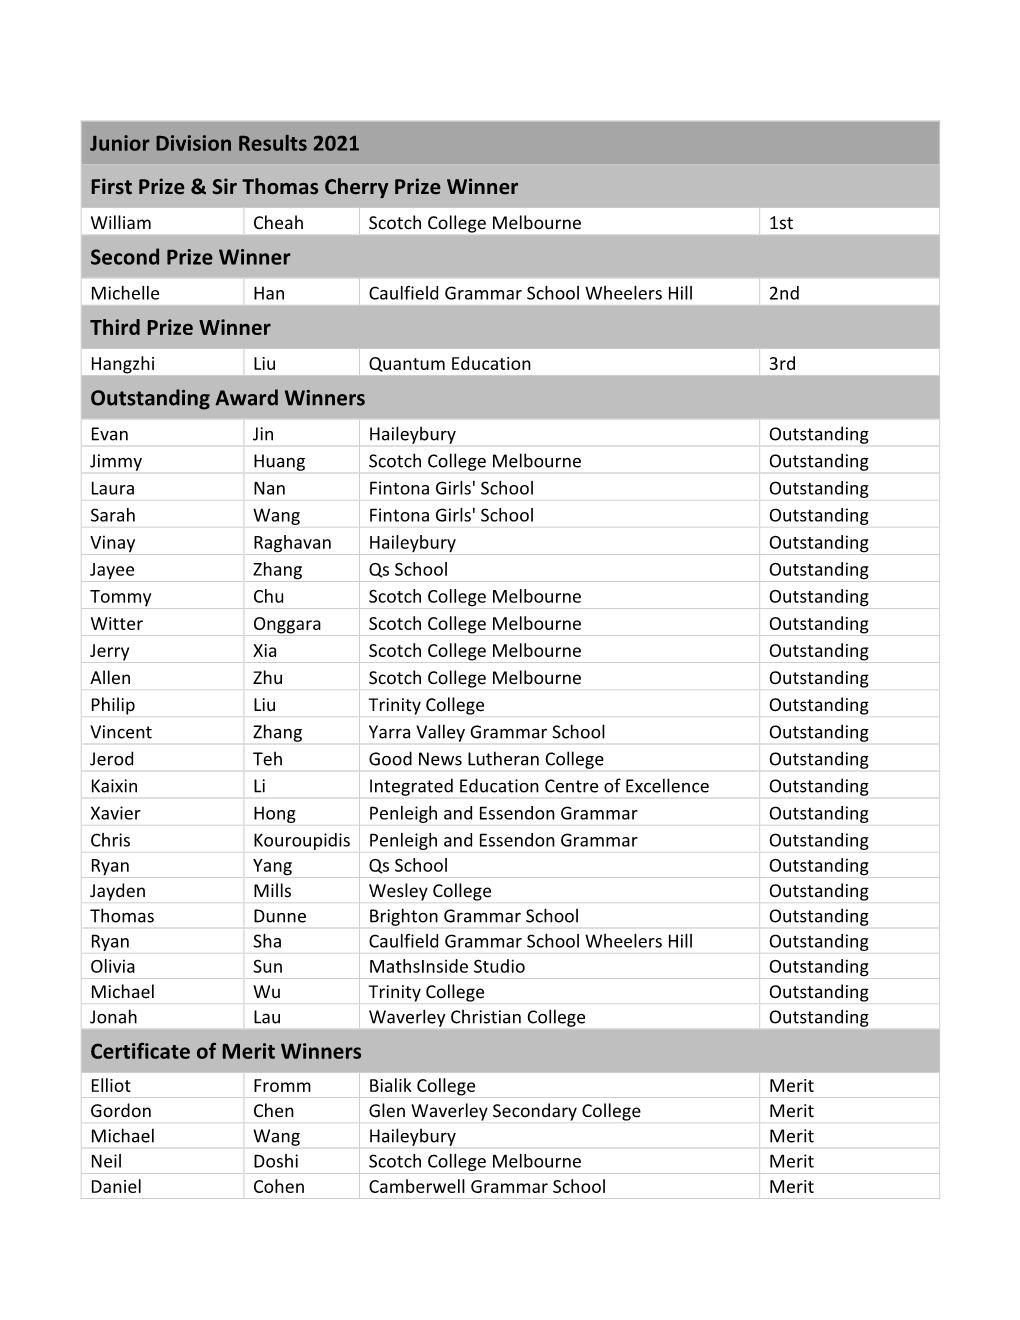 Junior Division Results 2021 First Prize & Sir Thomas Cherry Prize